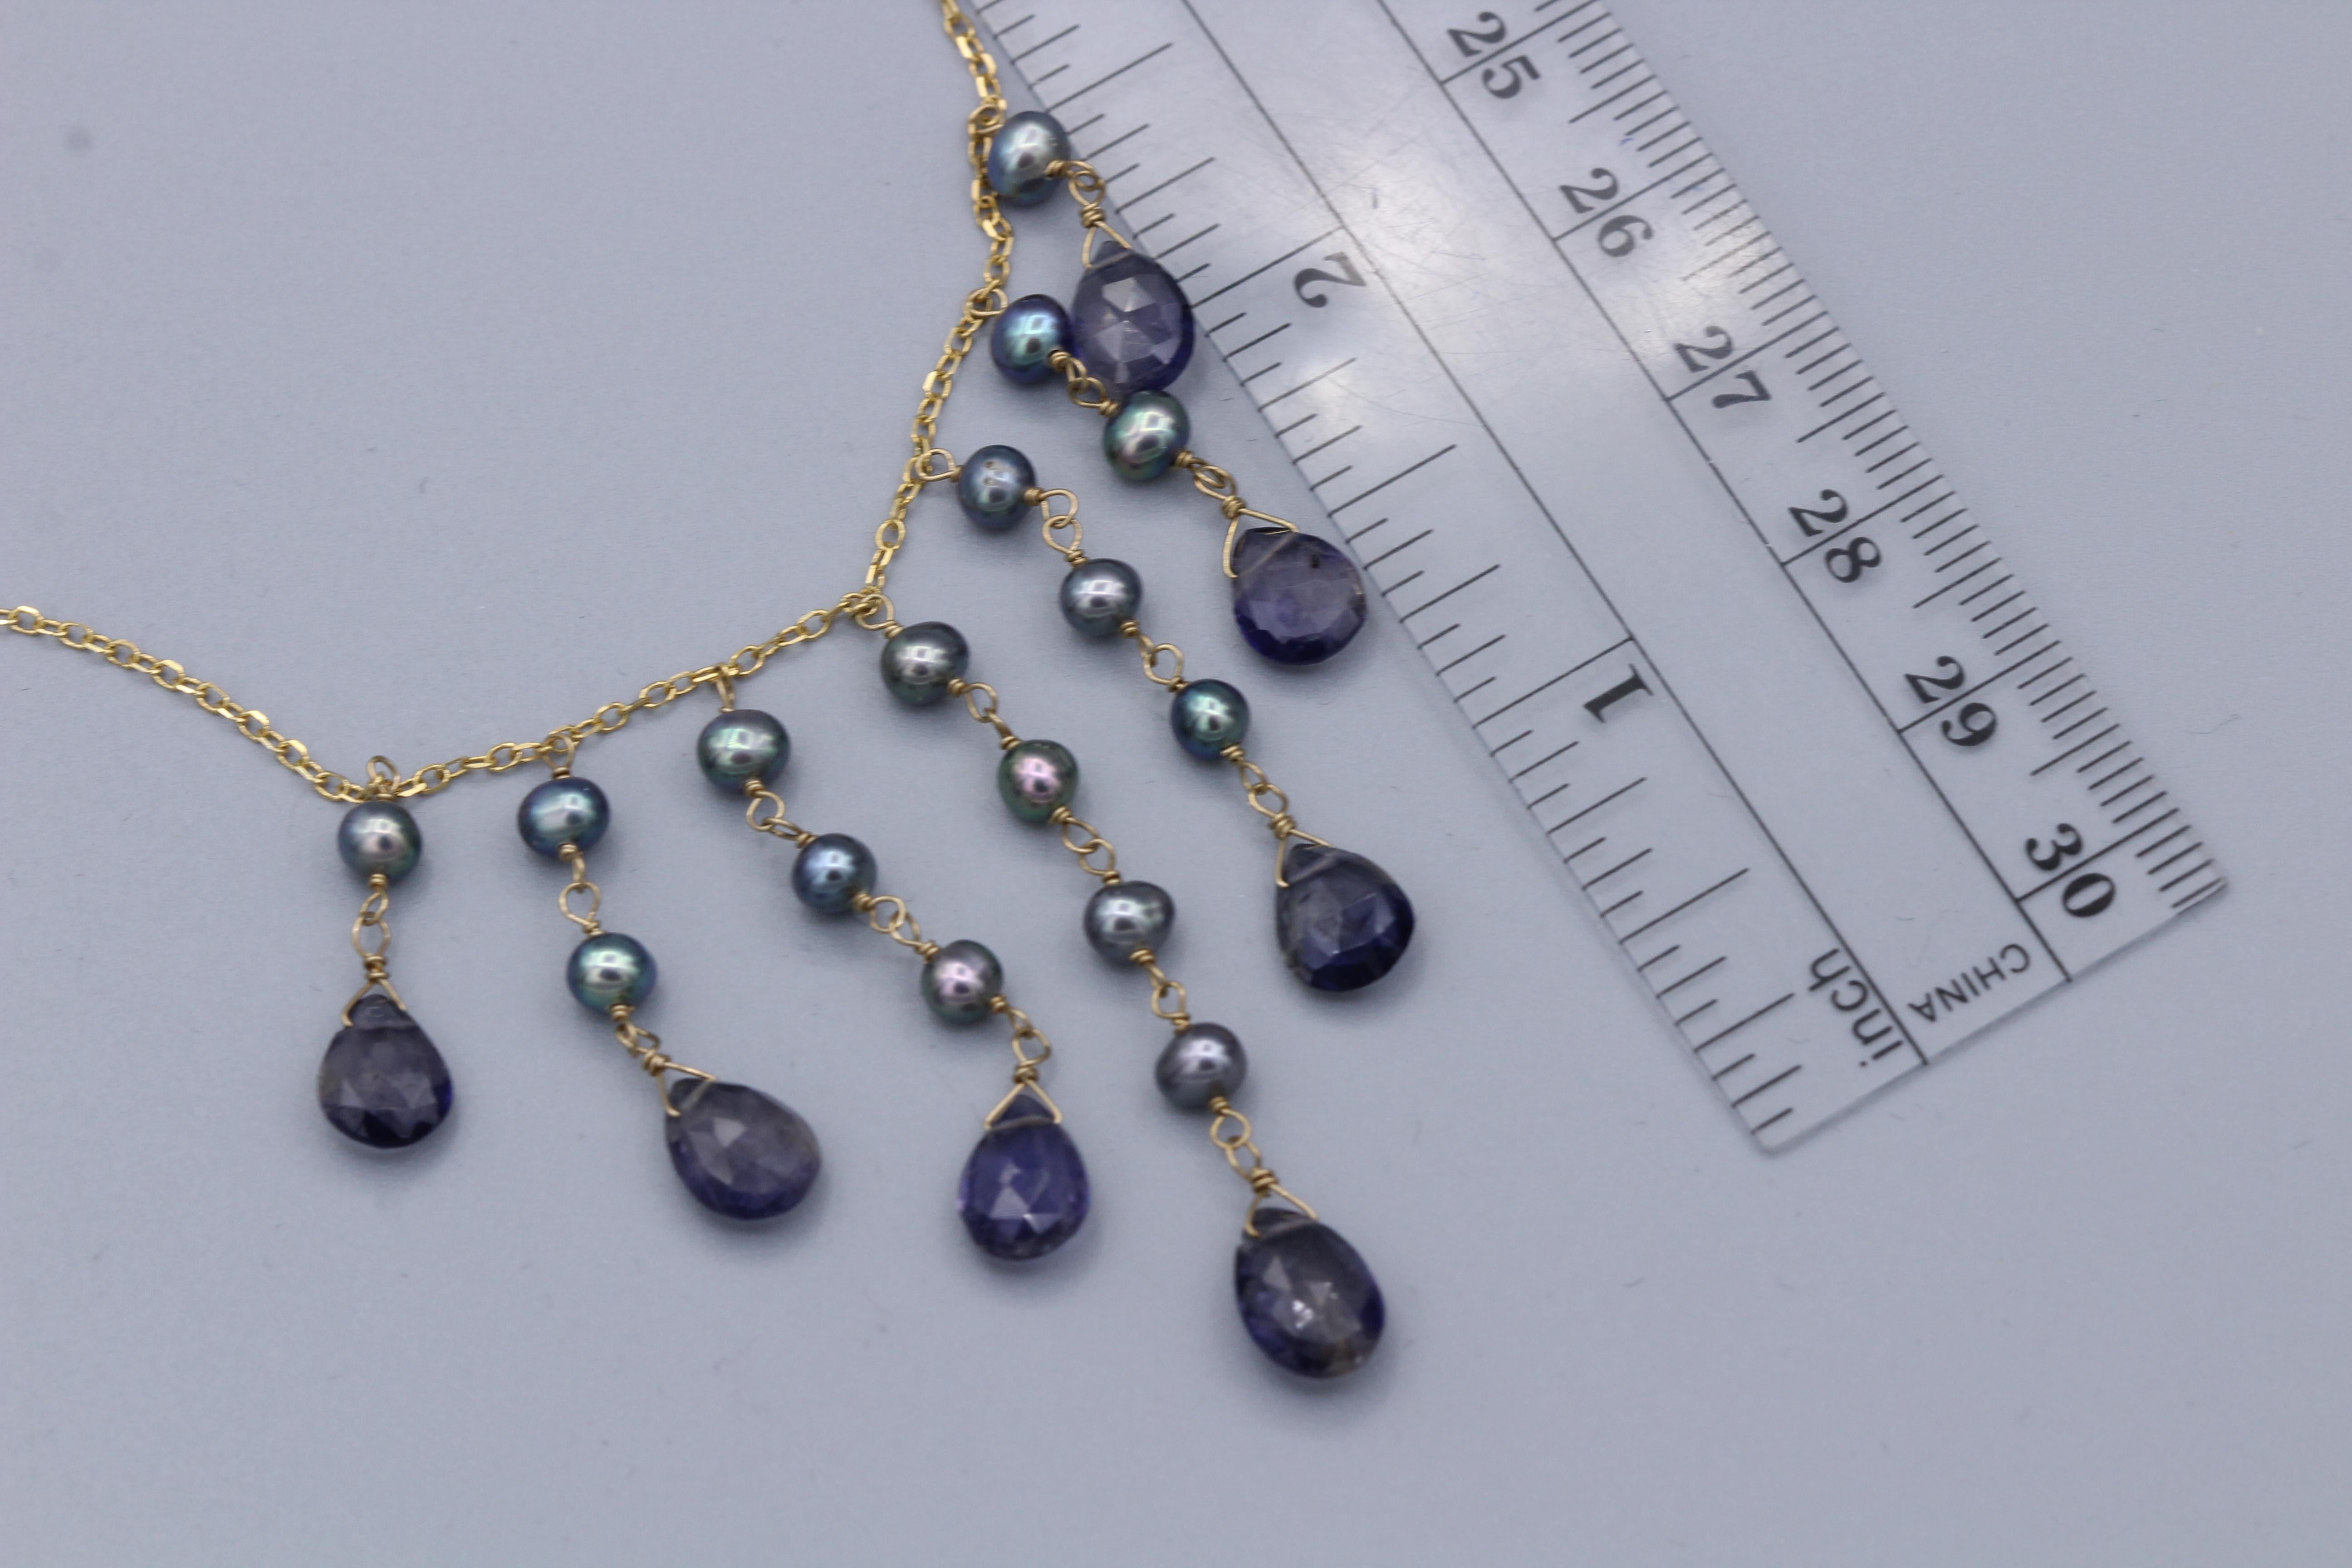 Dangling Necklace Blue Amethyst & Pearls Dangle Style 14 Karat Yellow Gold In New Condition For Sale In Brooklyn, NY